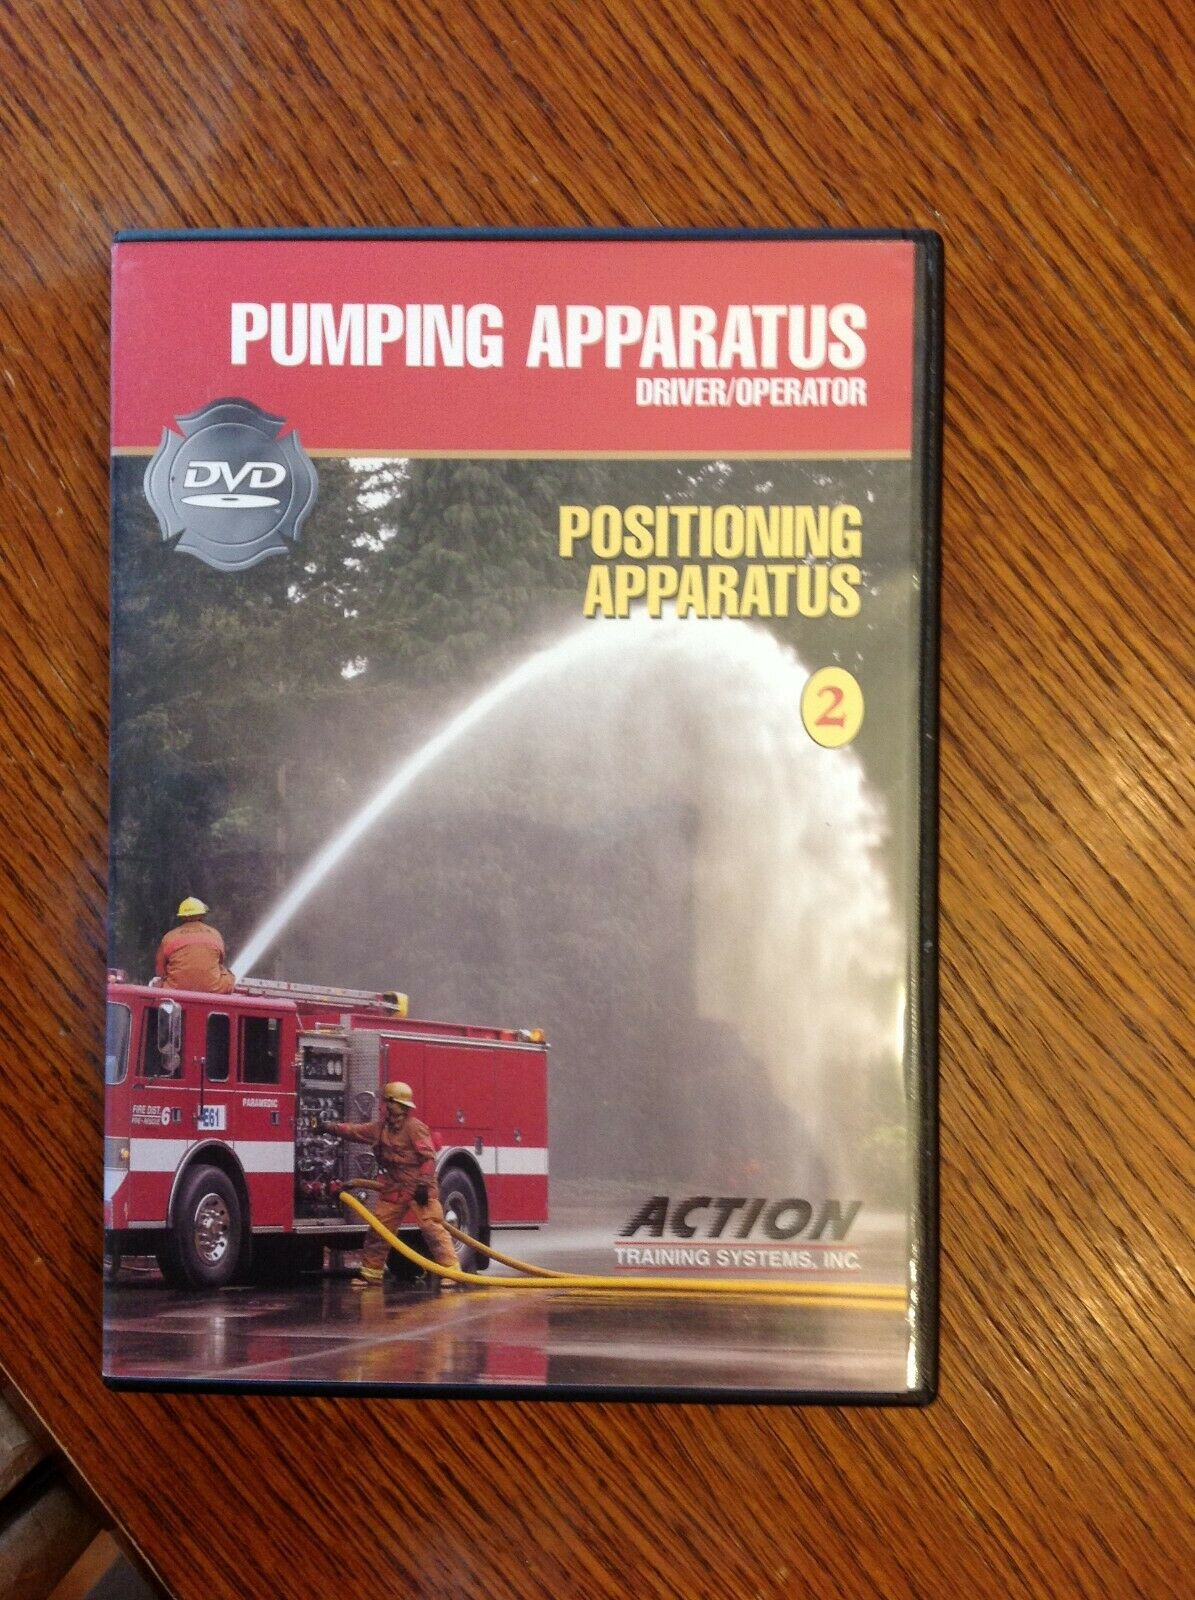 Action Training Dvd Fire Fighter Pumping Apparatus - Positioning Apparatus